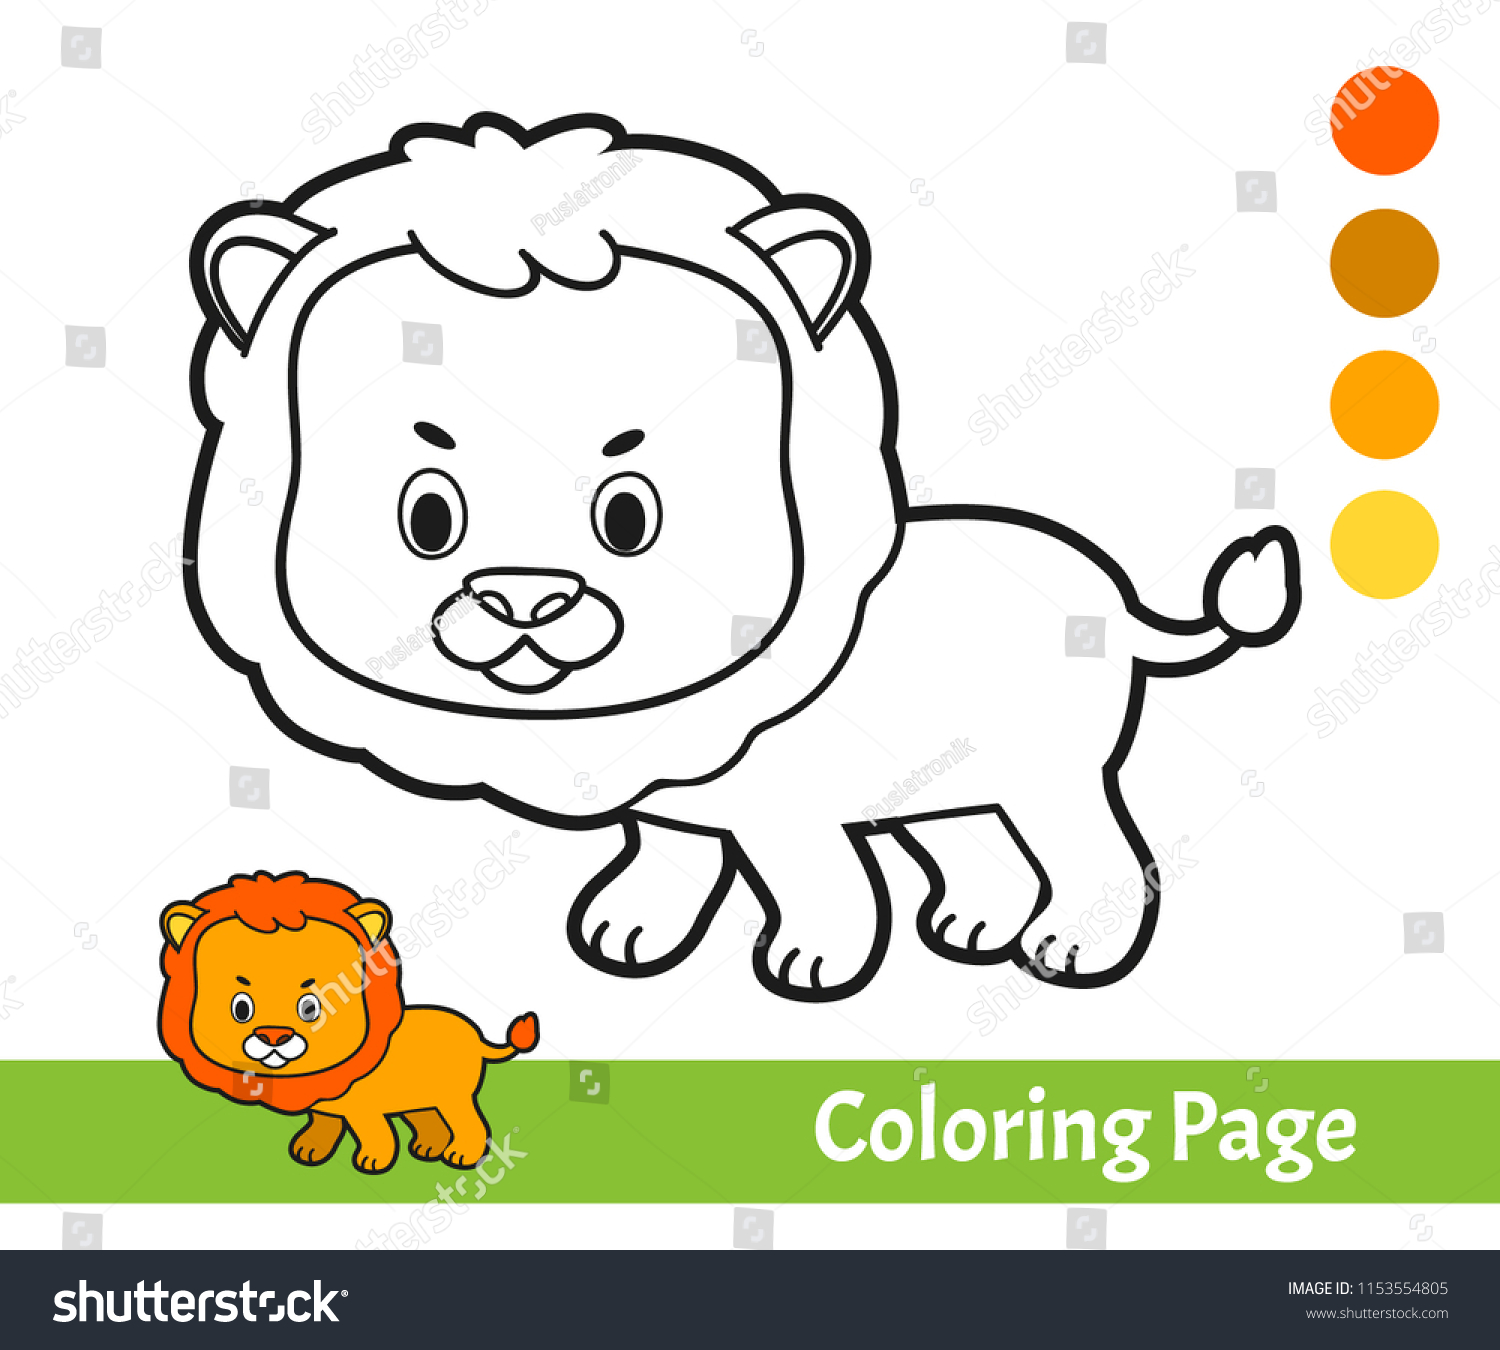 Download Kids Learning Game Coloring Book Children Stock Vector Royalty Free 1153554805